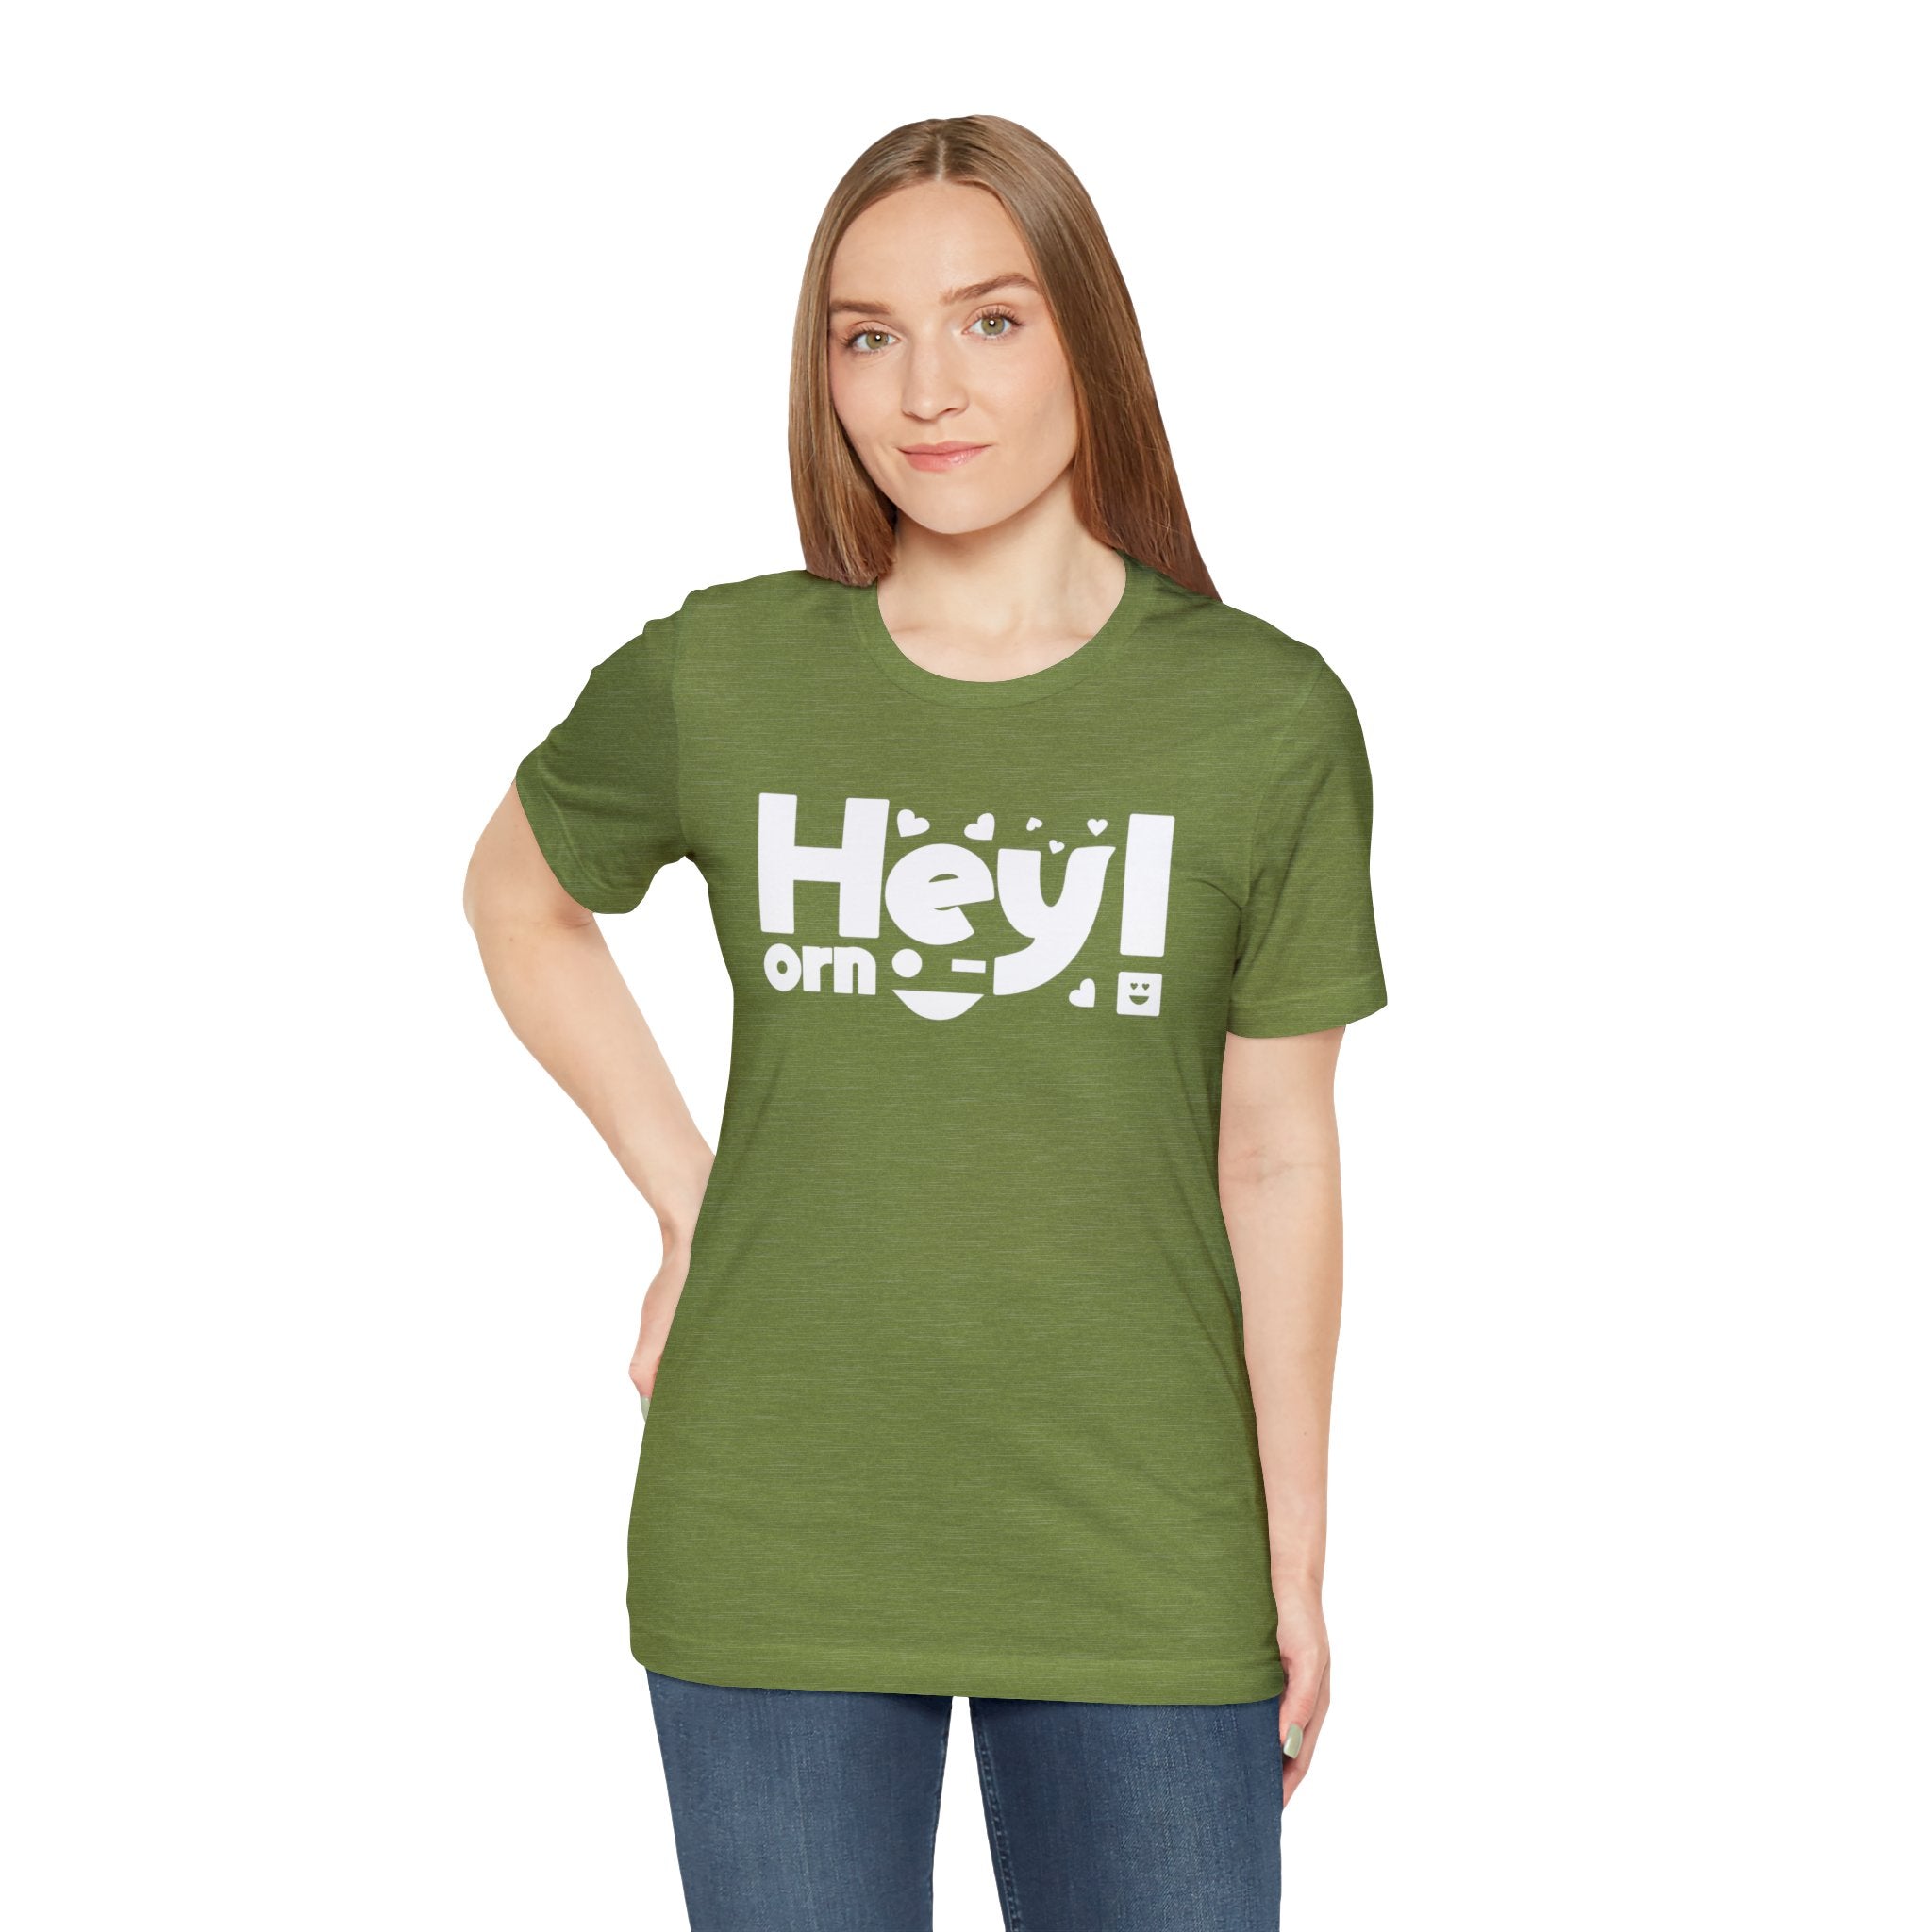 A woman in a Hey-rny T Shirt makes a fashion statement.